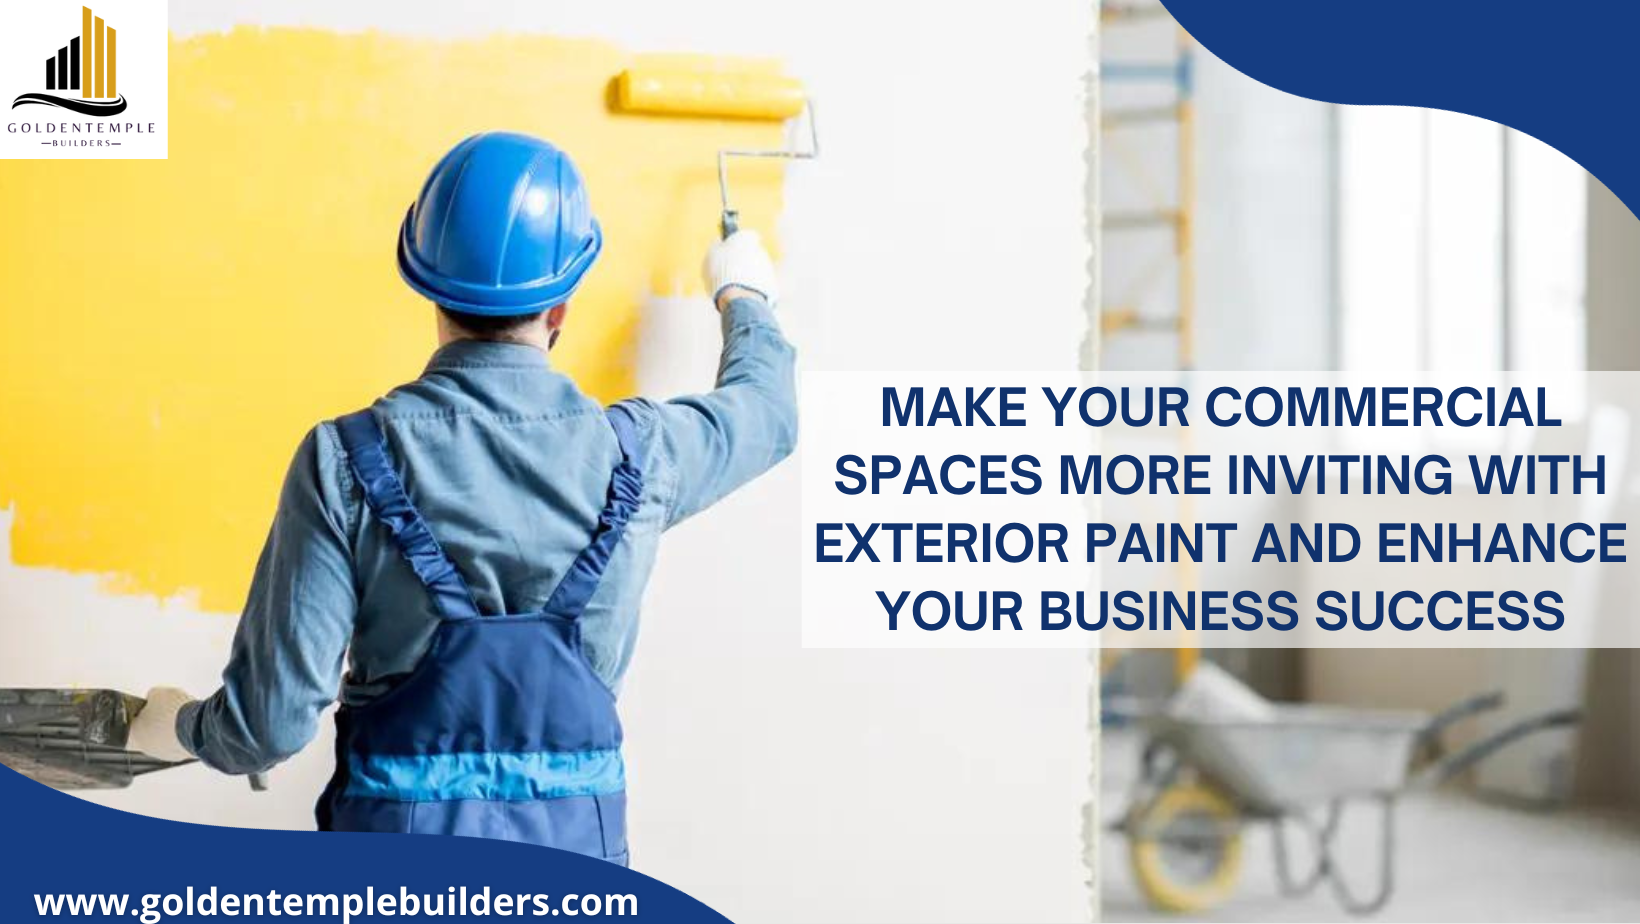 Make Your Commercial Spaces More Inviting with Exterior Paint and Enhance Your Business Success – GoldenTemple Builders